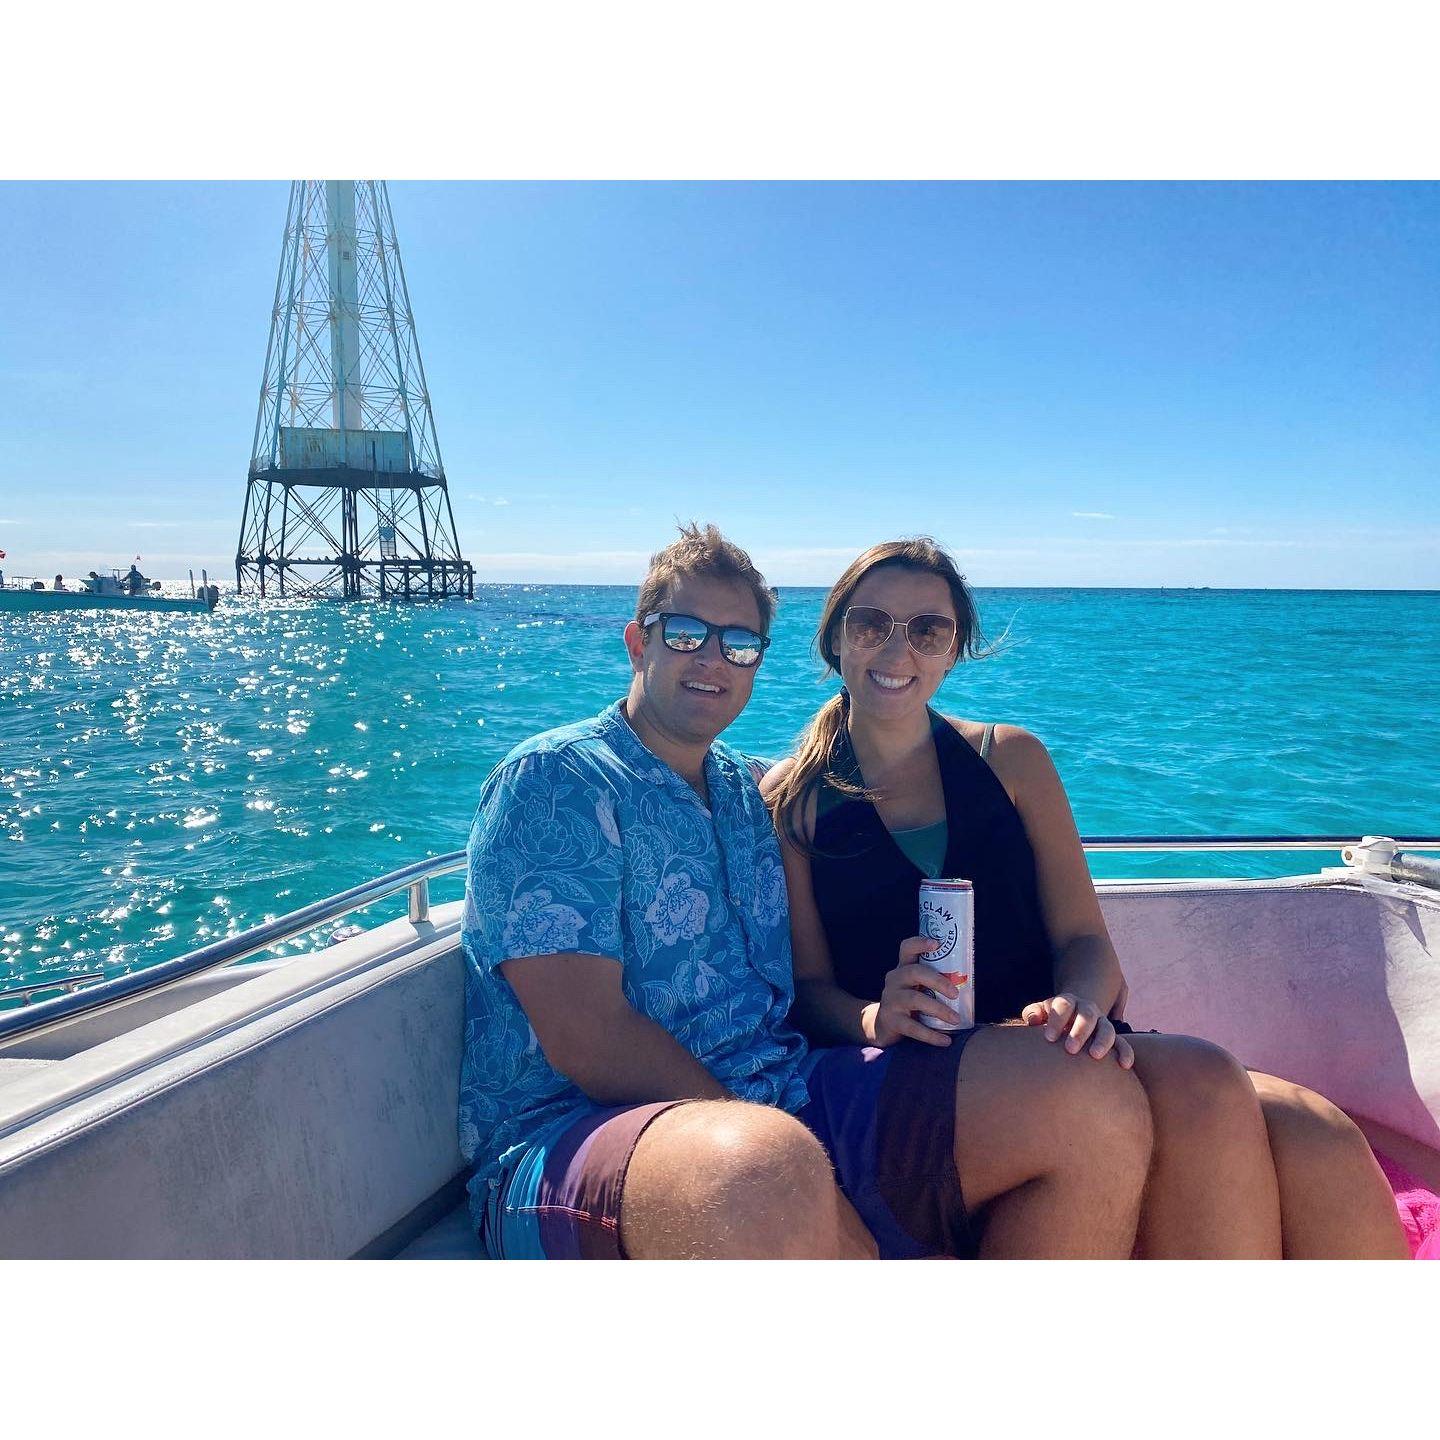 One of Fred and Jordan's favorite places to visit: Alligator Reef in Islamorada, FL! They enjoy snorkeling, floating and listening to their favorite Kenny Chesney songs.